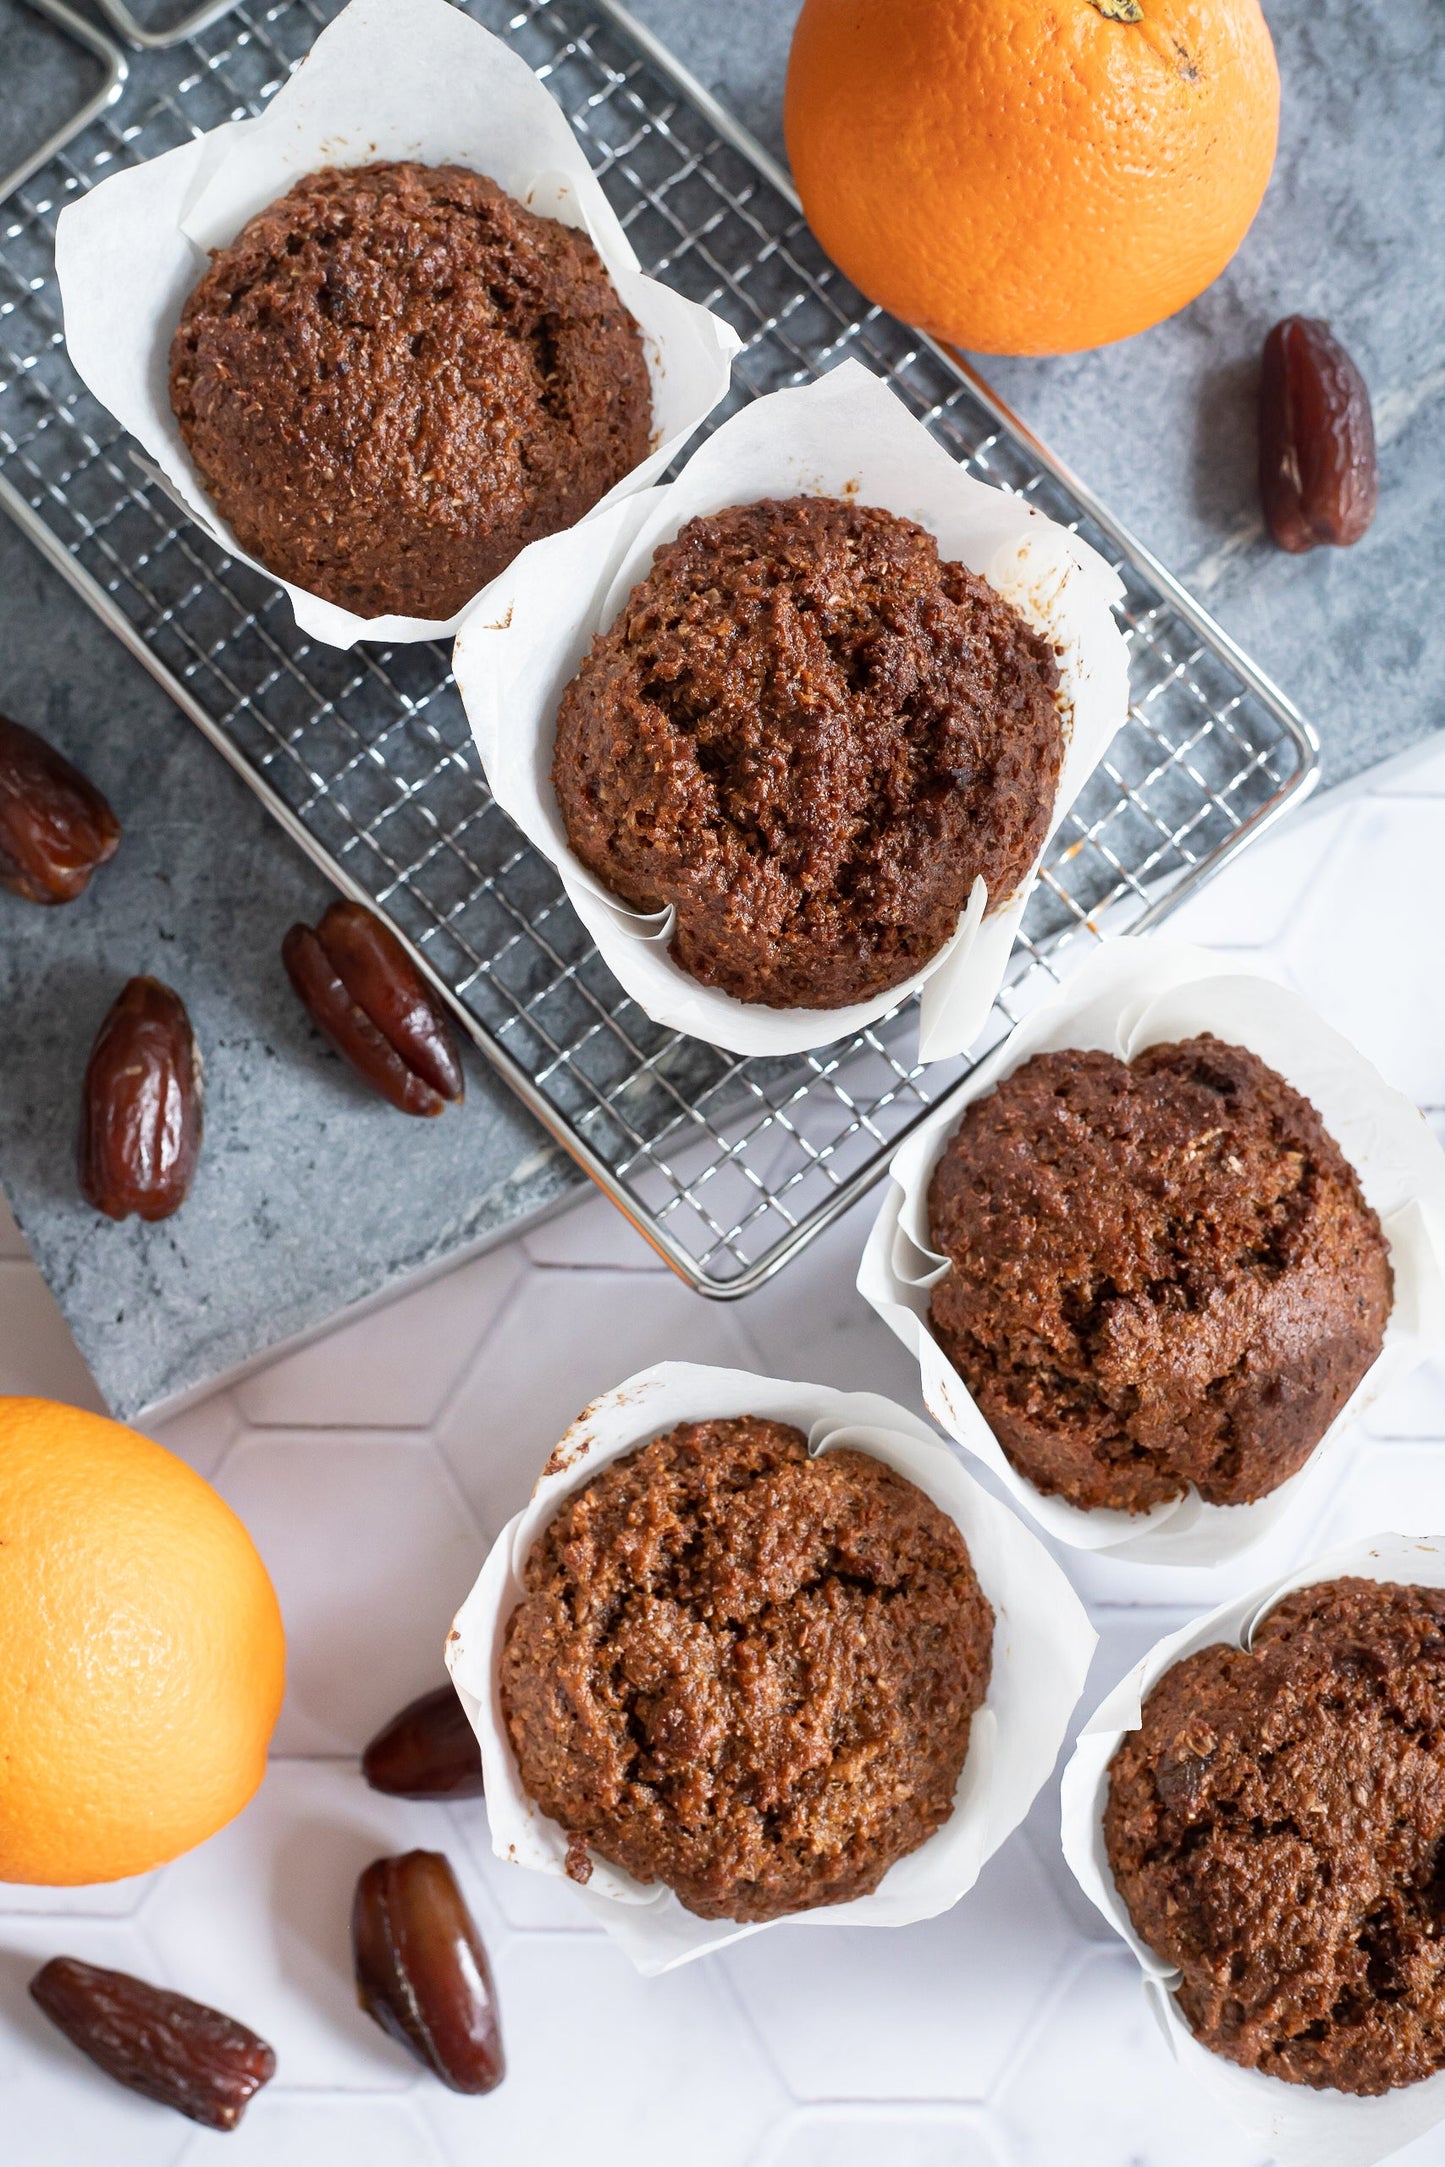 Bran muffin with orange and dates